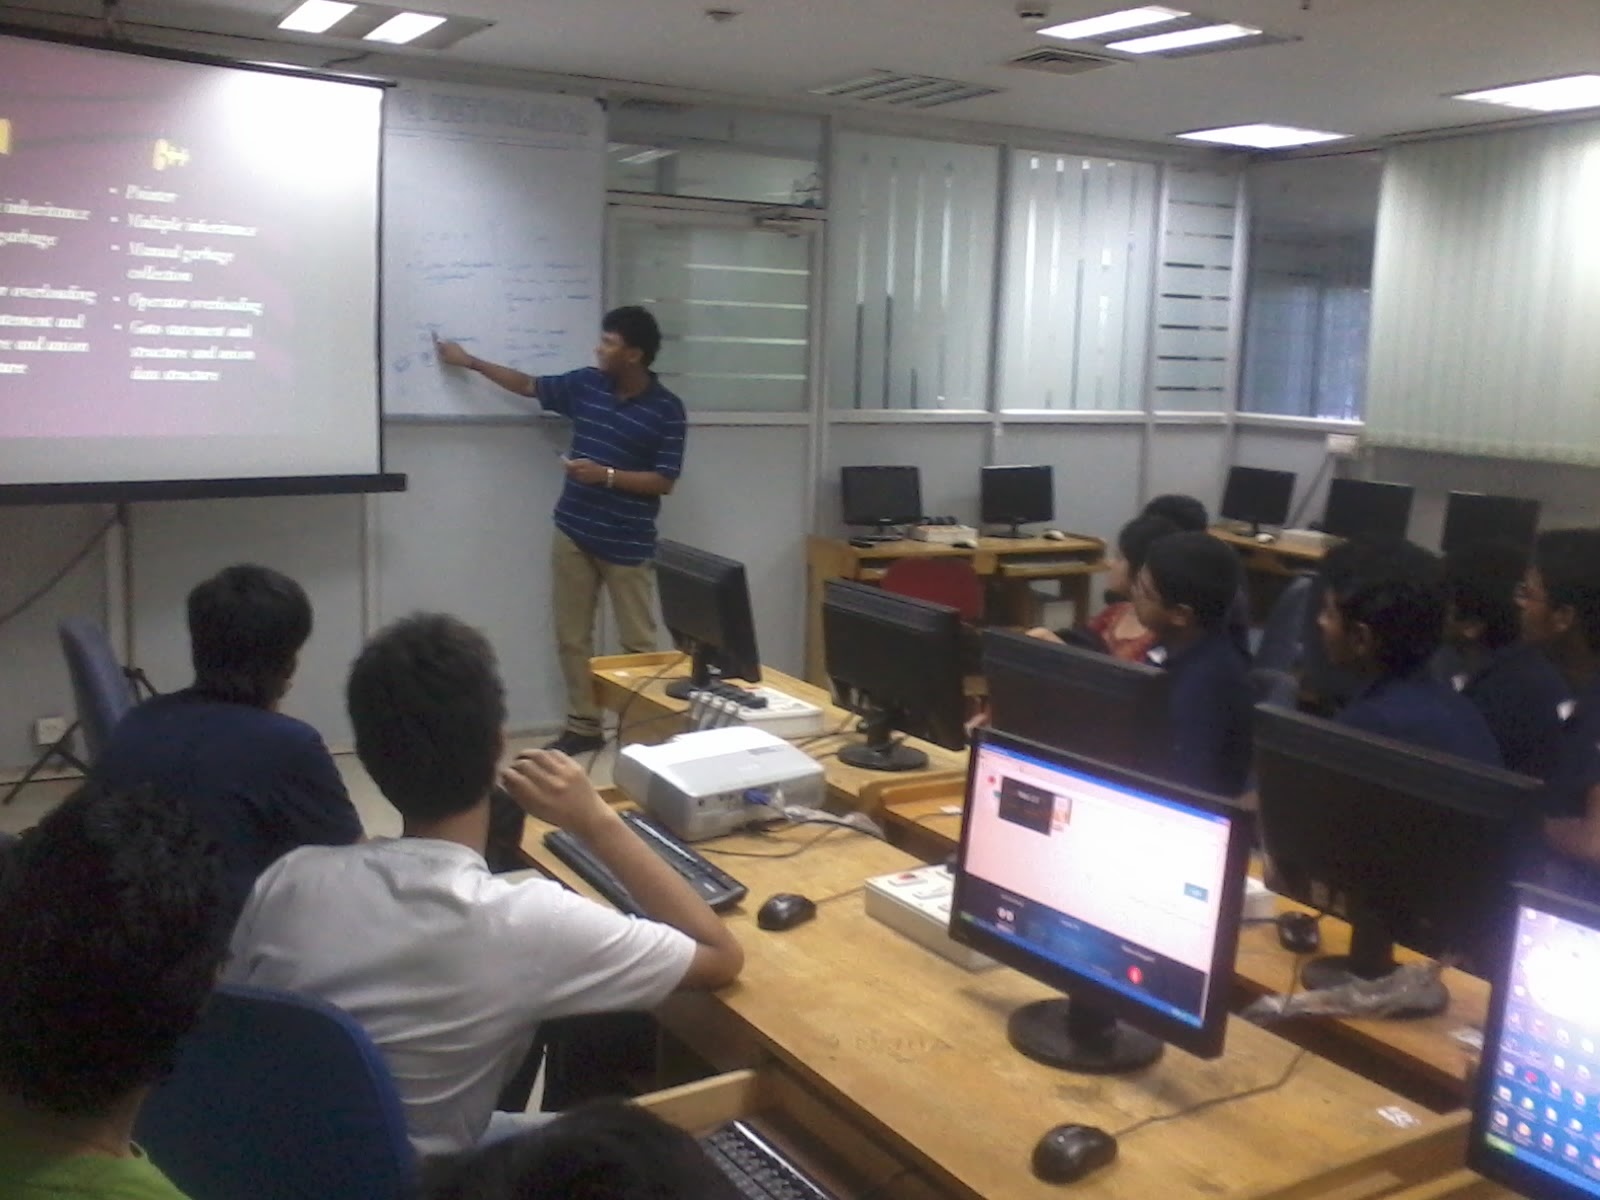 Sourav Ghosh, teaching a course to students on Programming